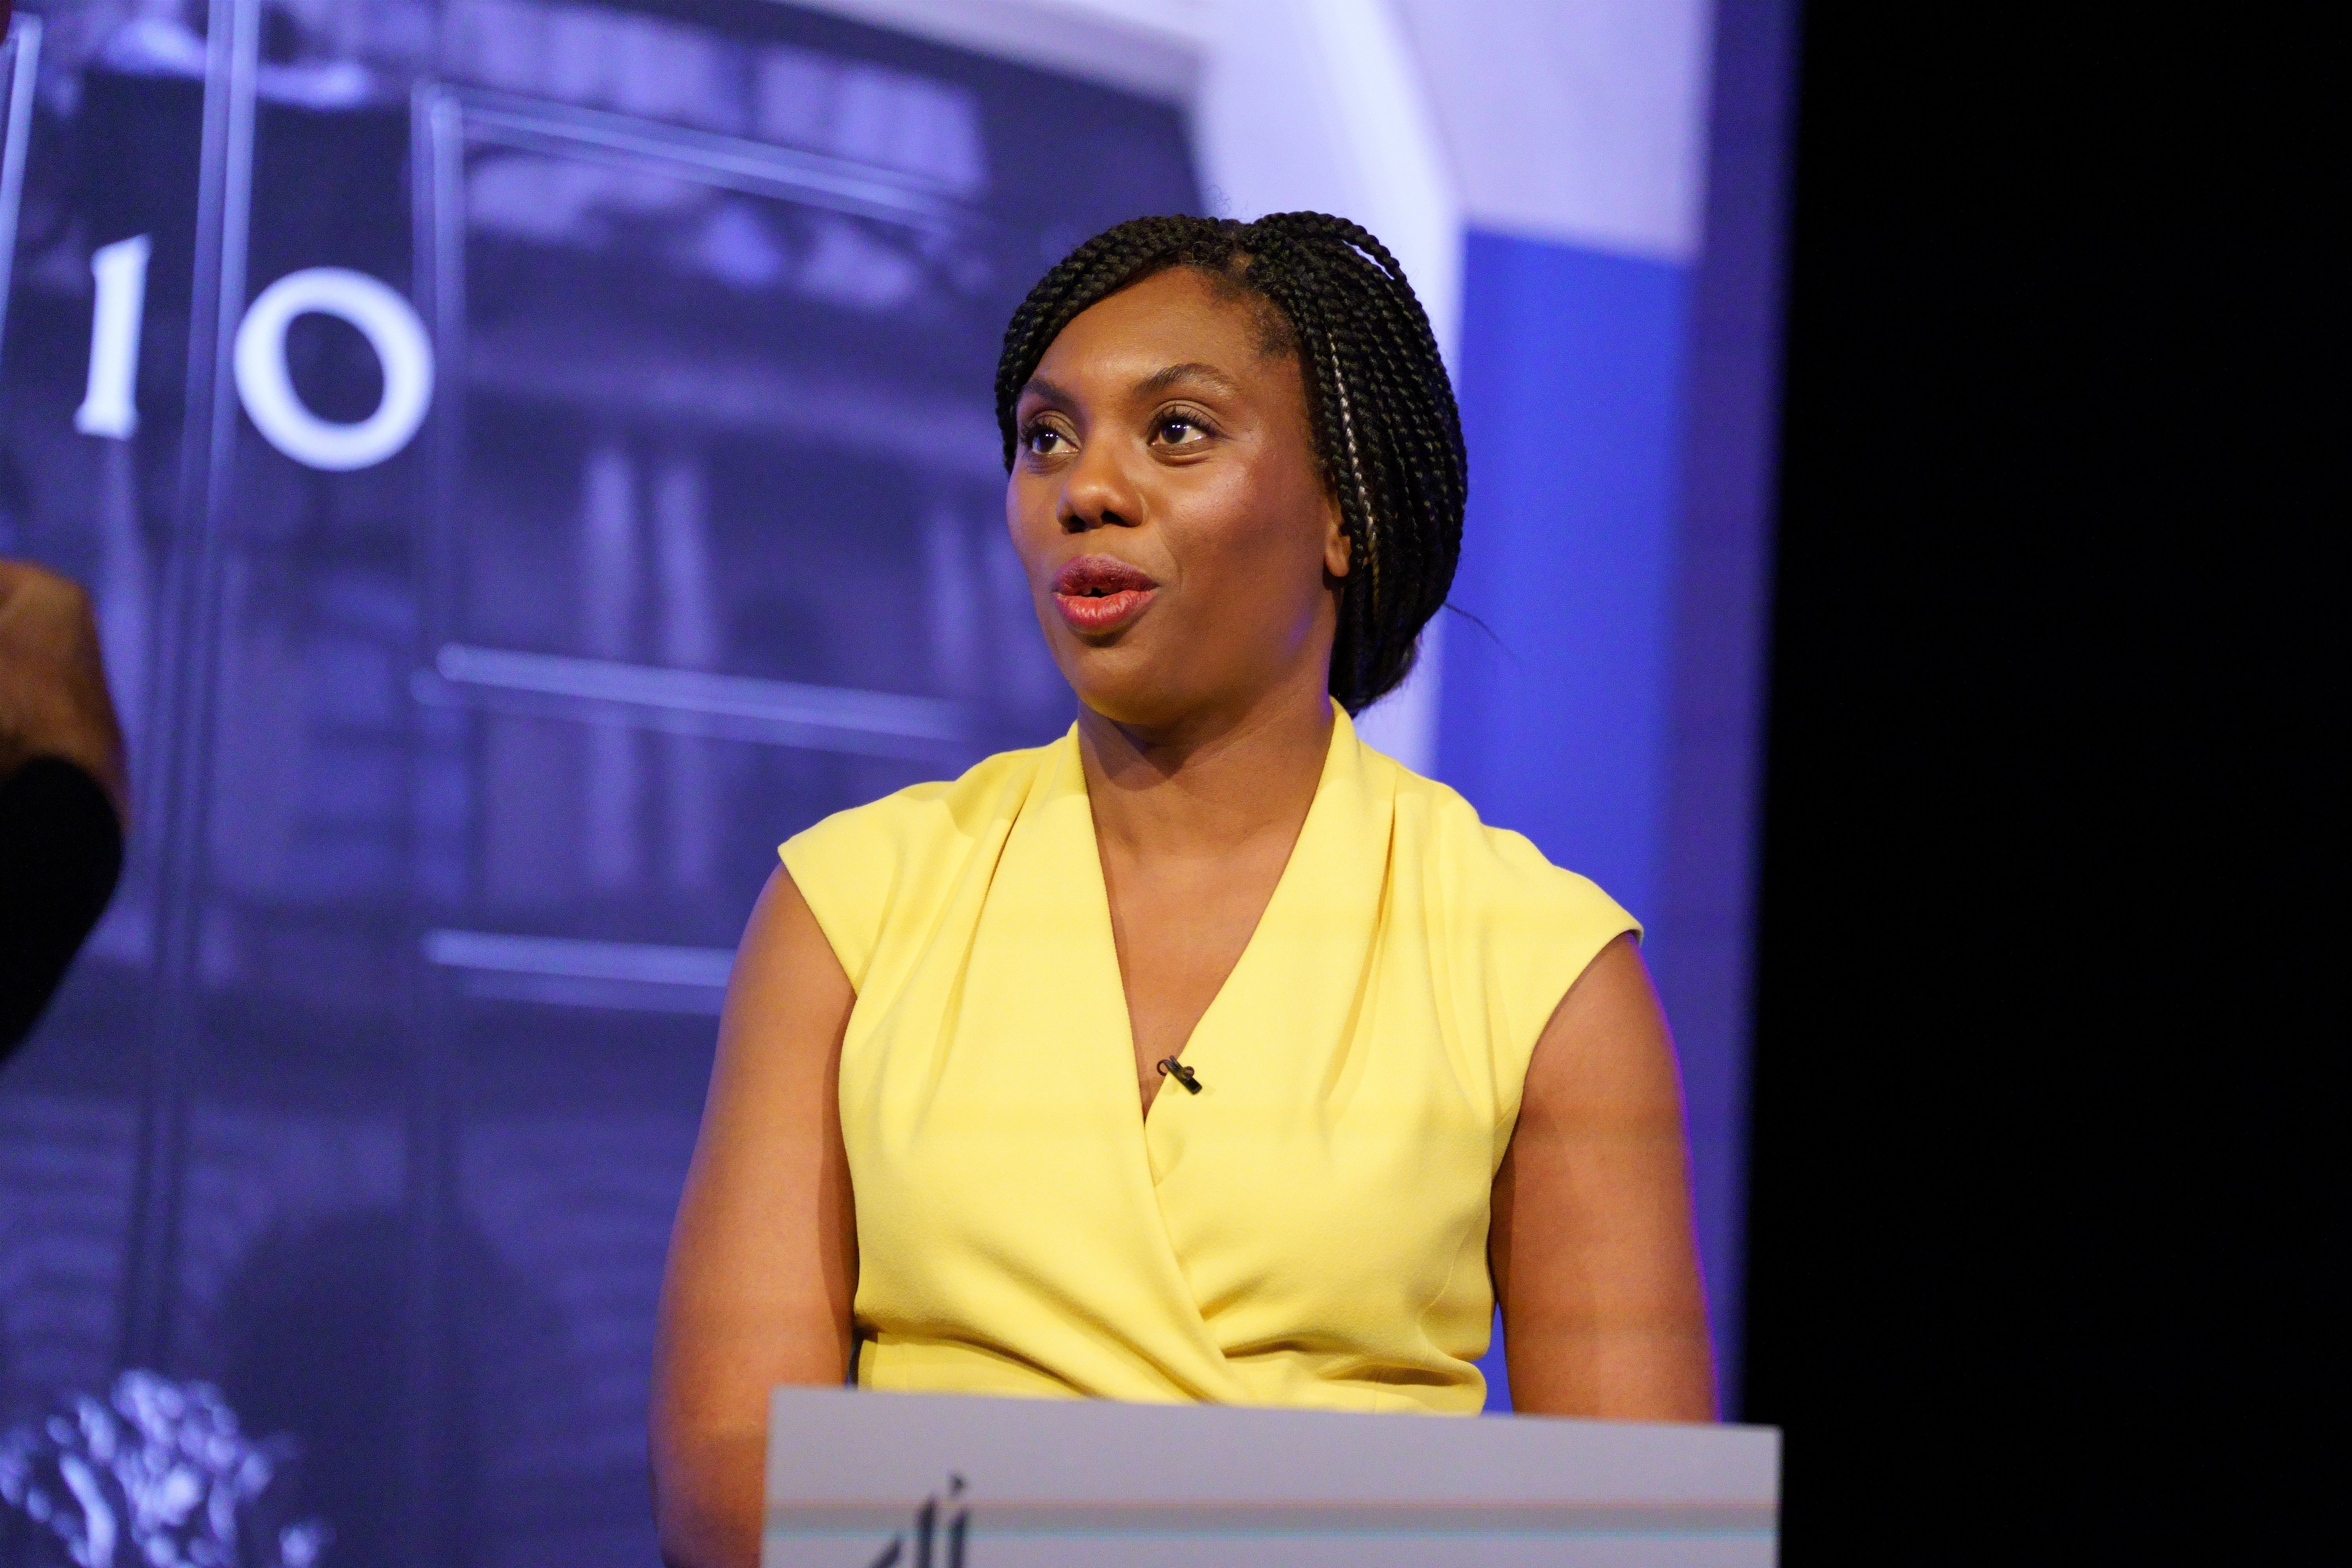 Kemi Badenoch secured the fewest votes in fourth ballot